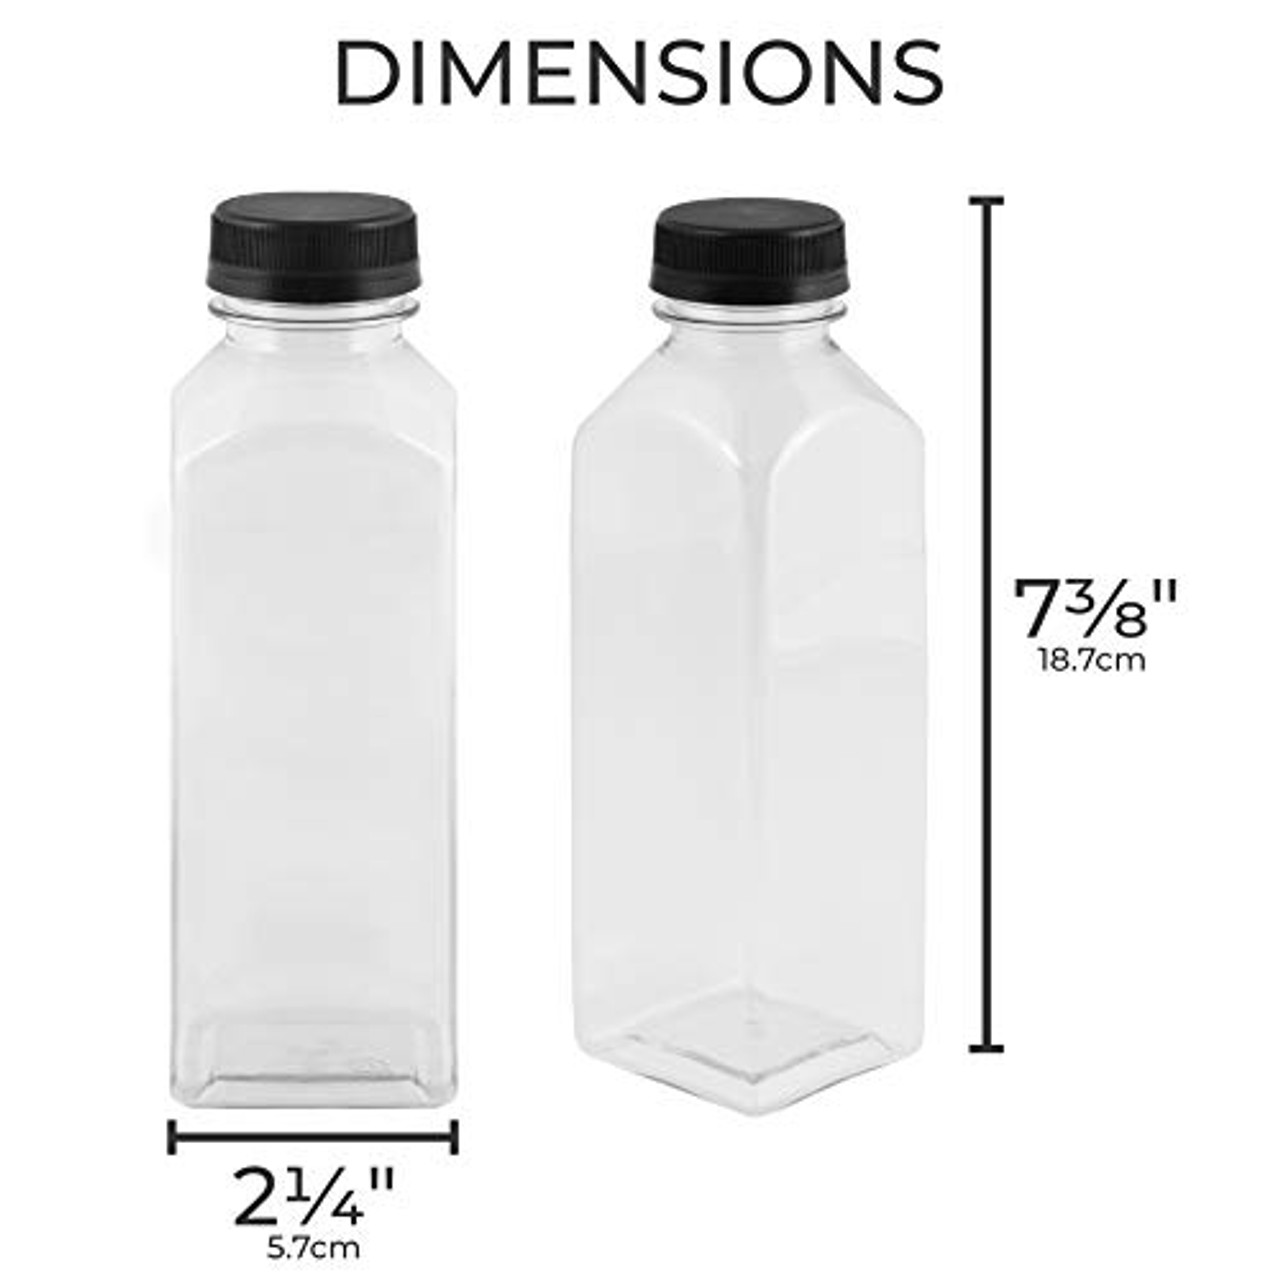 Stock Your Home Plastic Juice Bottles with Lids, 16 Oz, 35 Count